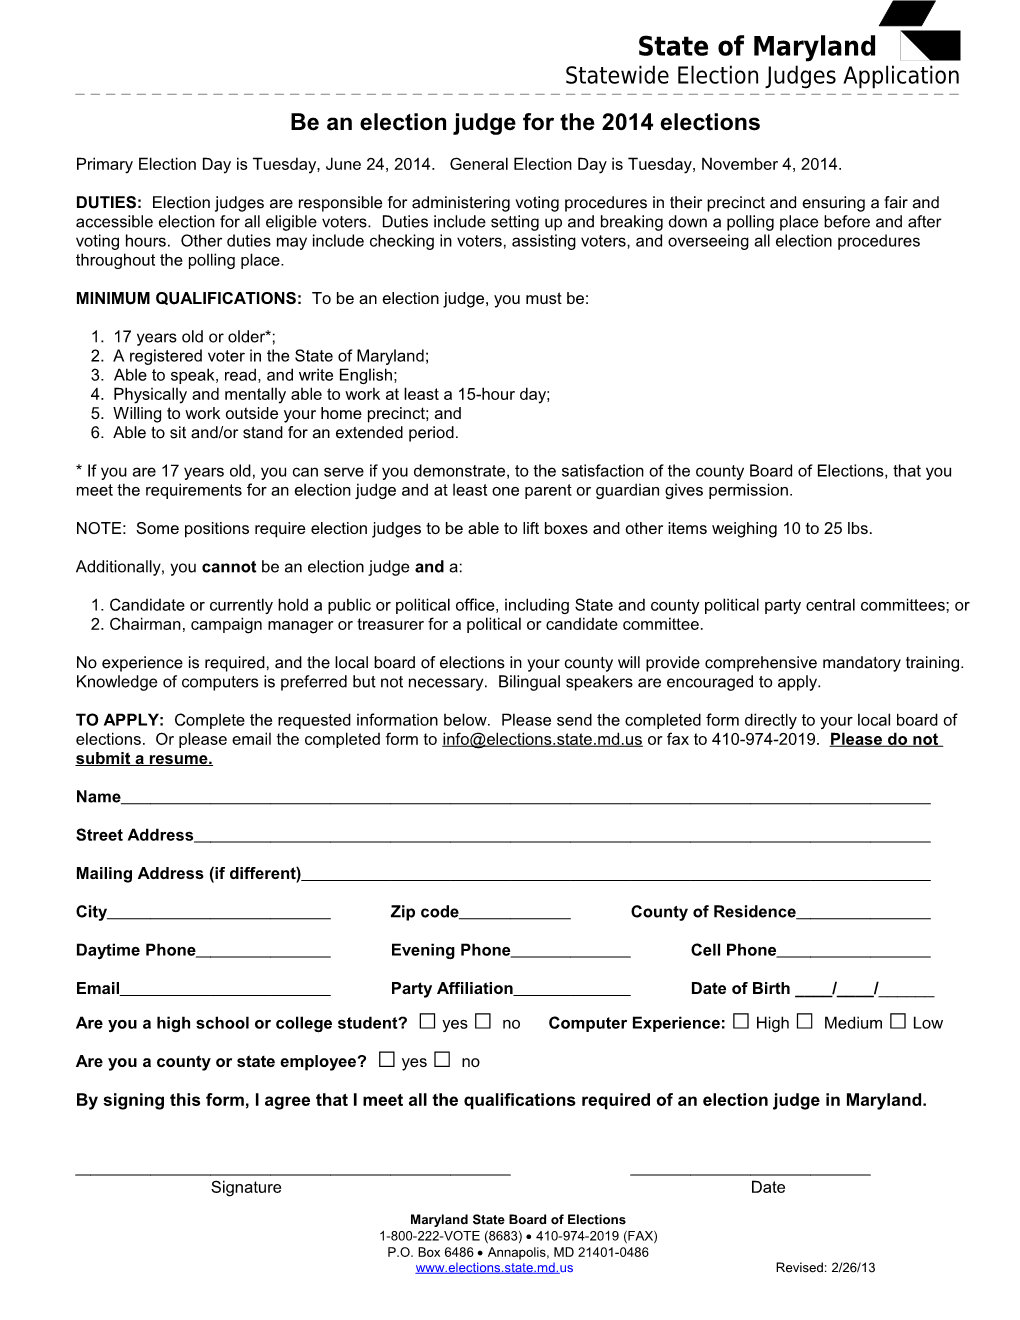 Statewide Election Judges Application